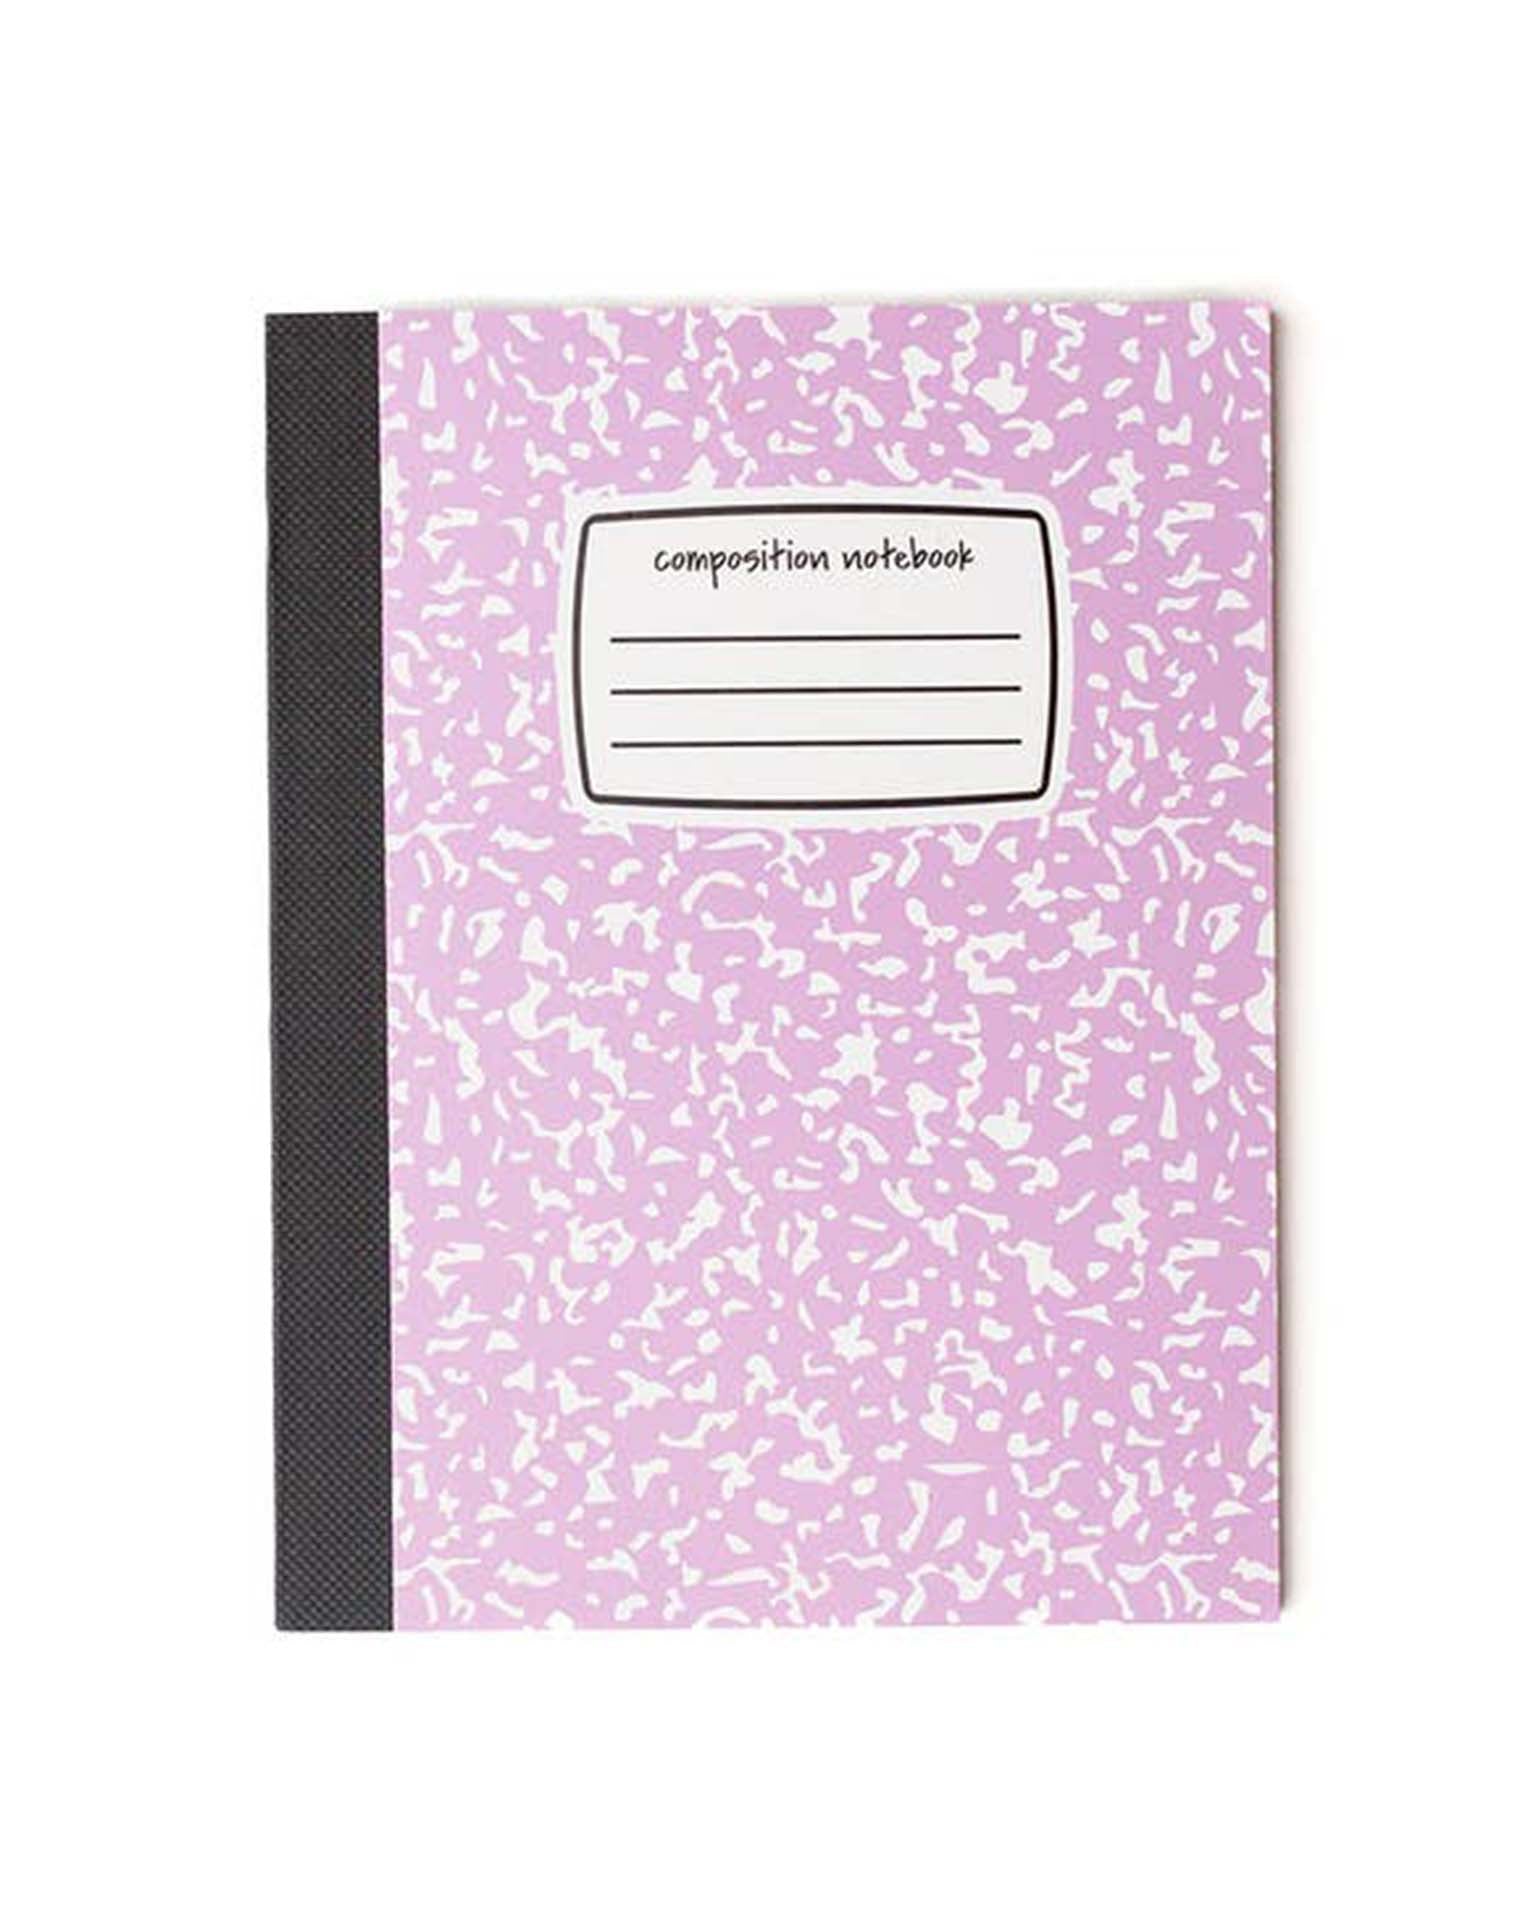 Little Daydream Society party lilac mini composition notebook